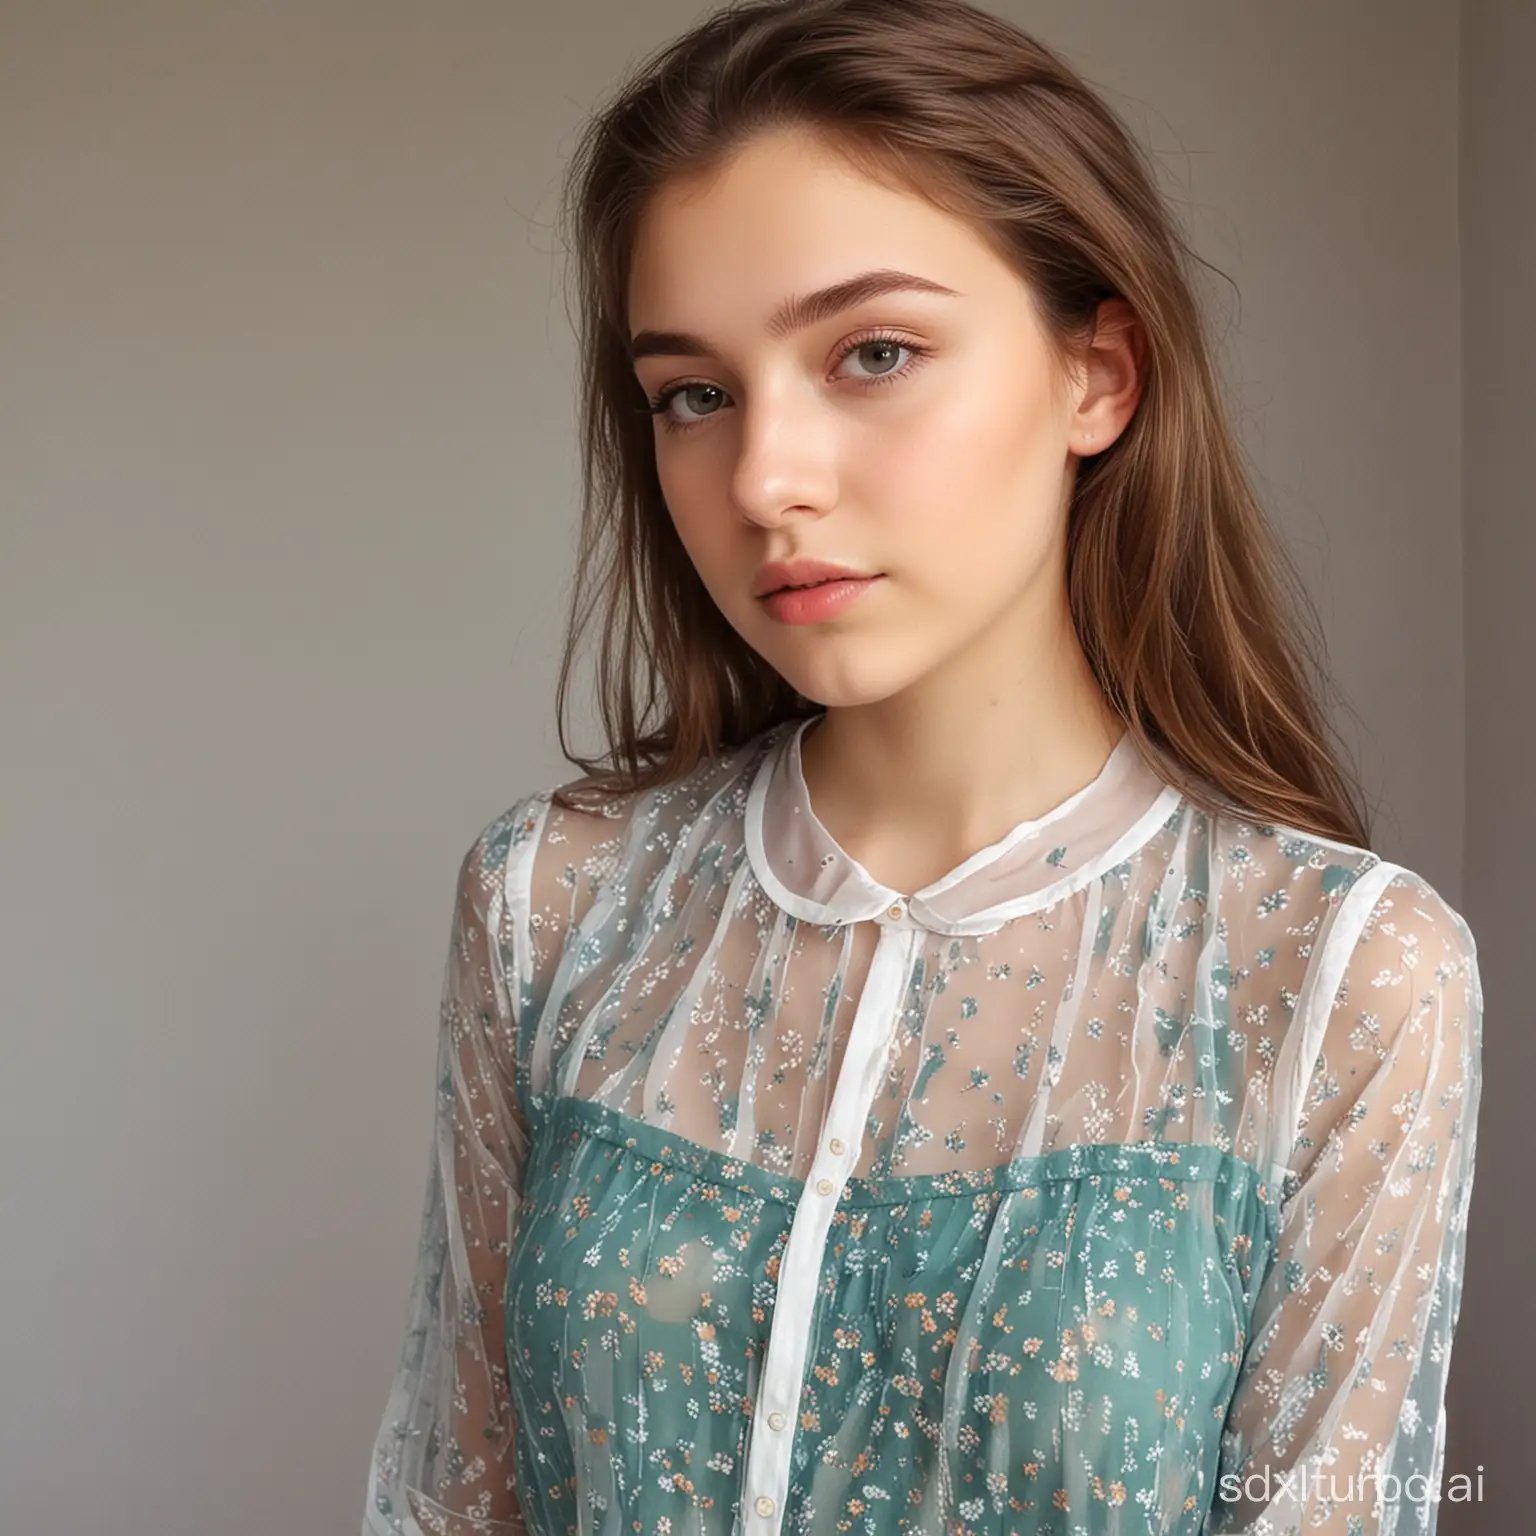 Elegant-Teen-in-Sheer-Blouse-Fashionable-Style-for-Teens